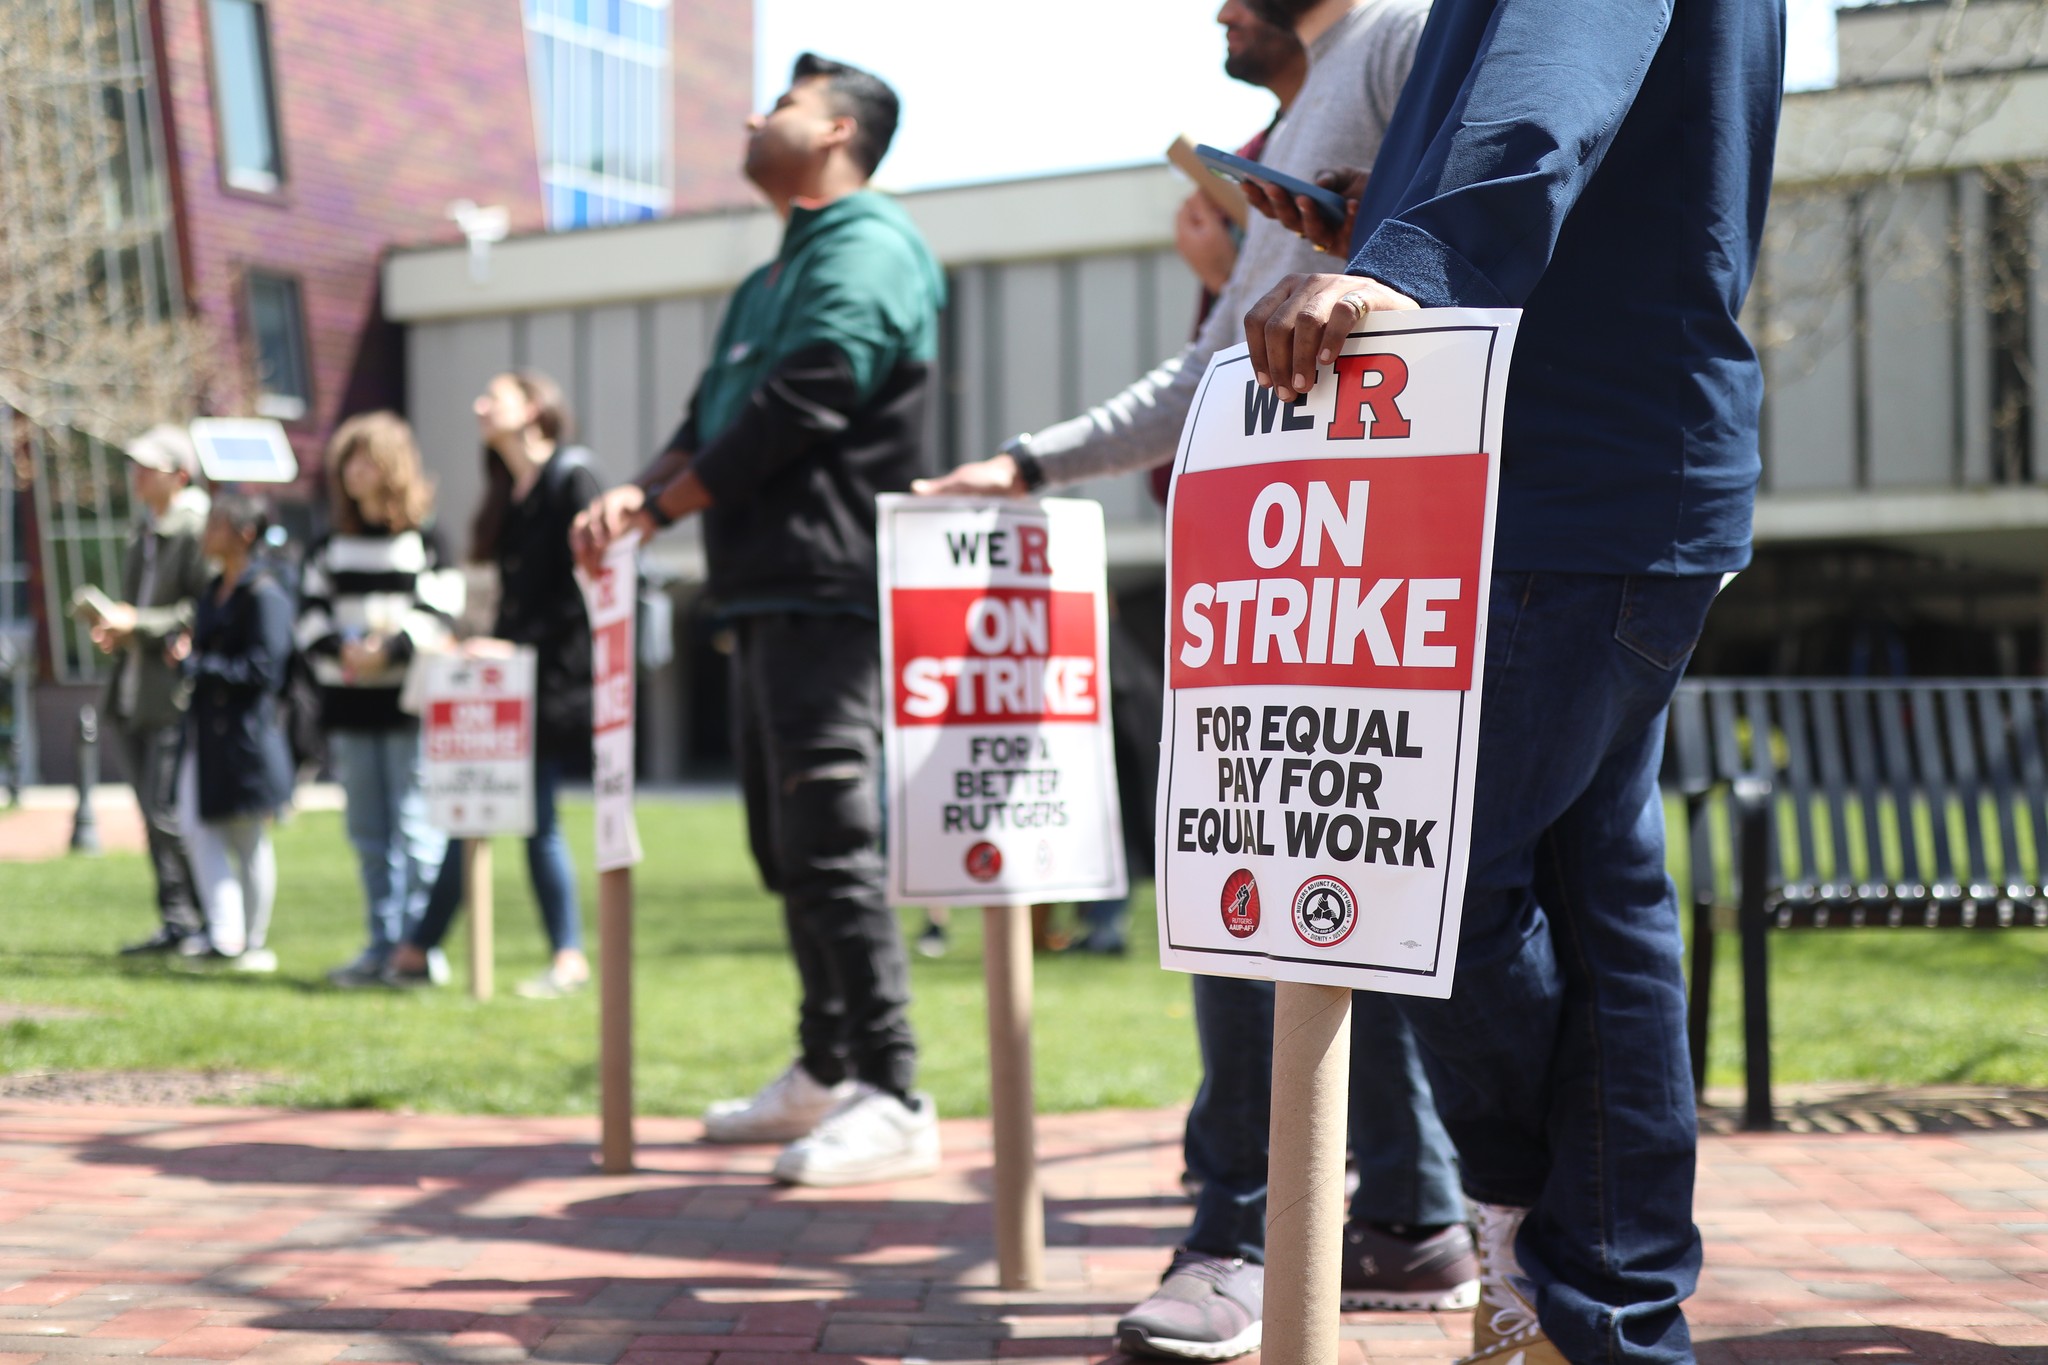 RUTGERS PROFESSORS COULD GO BACK ON STRIKE BEFORE FINALS